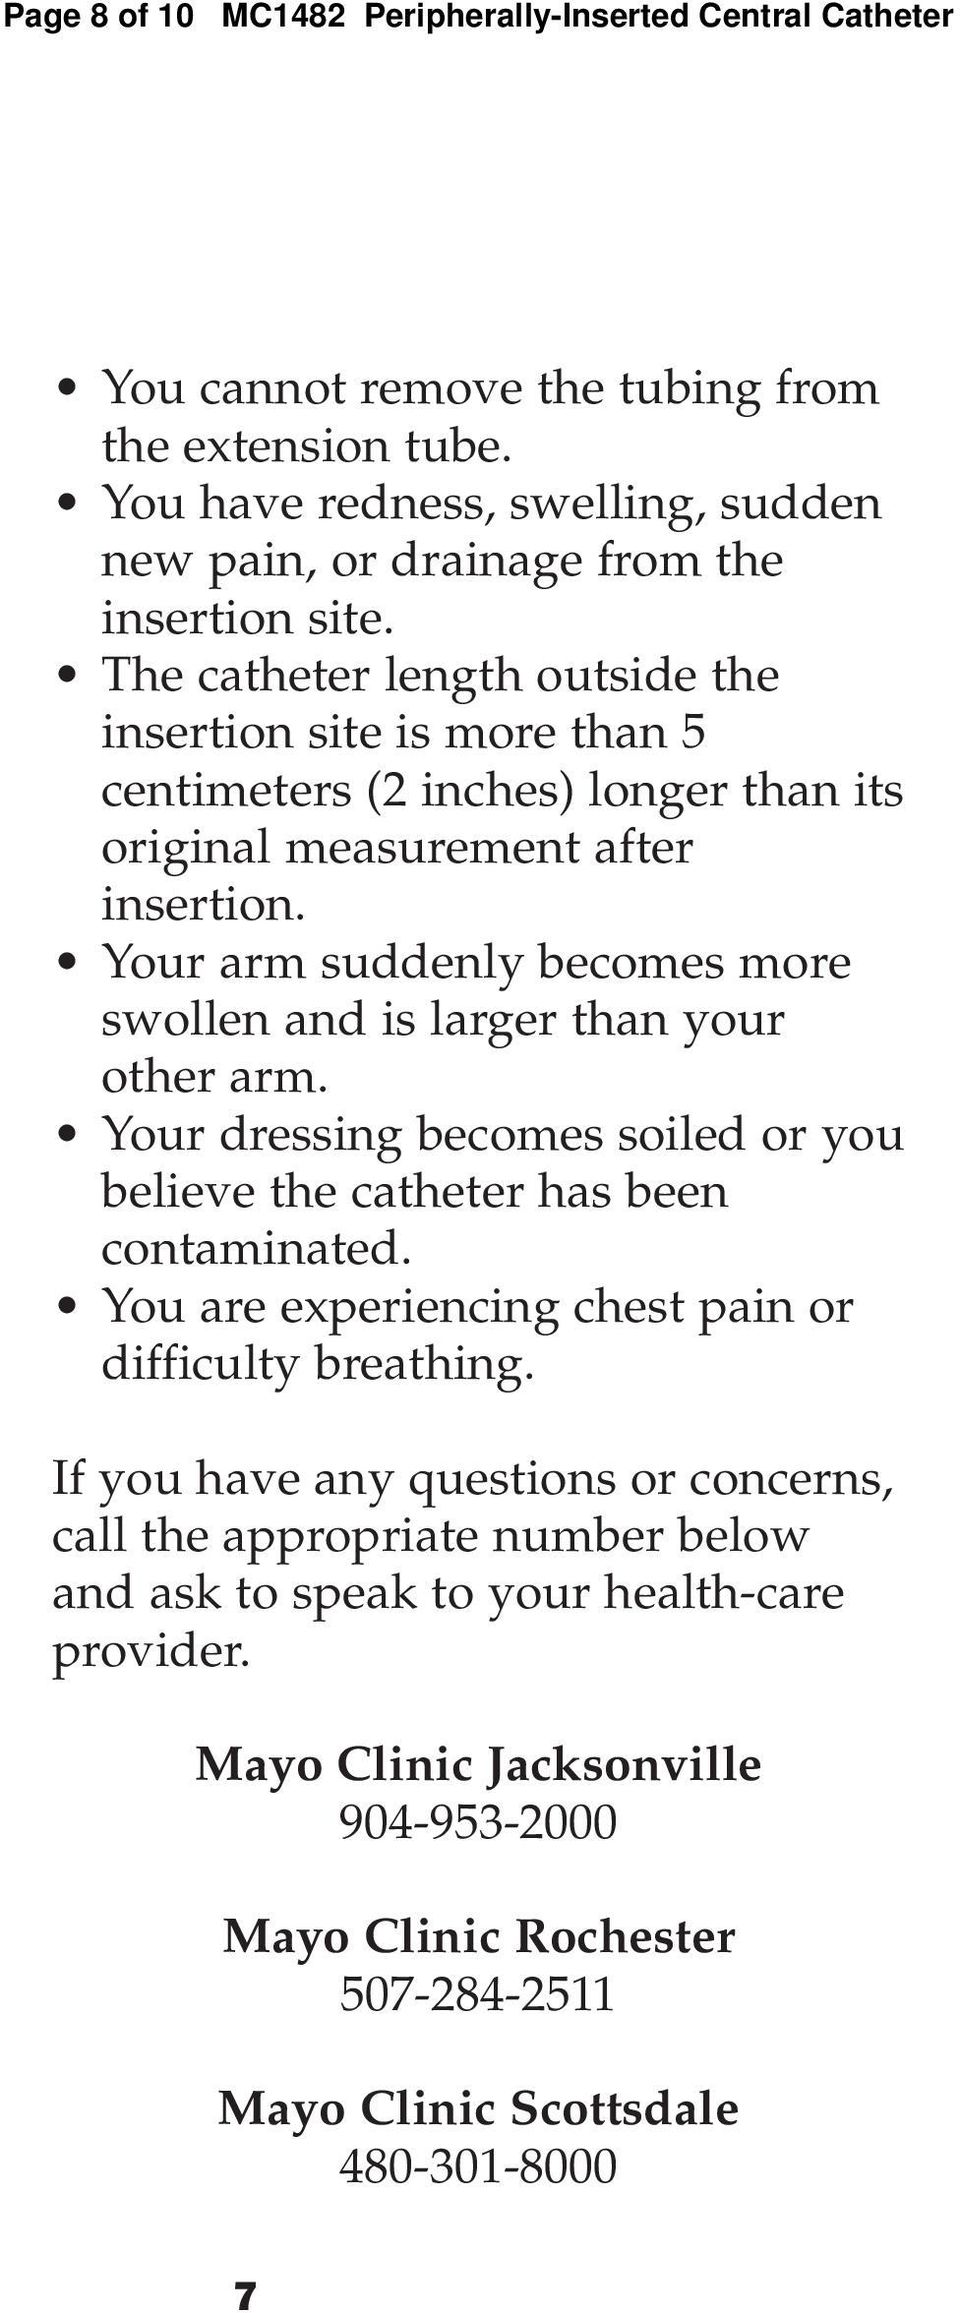 Your arm suddenly becomes more swollen and is larger than your other arm. Your dressing becomes soiled or you believe the catheter has been contaminated.